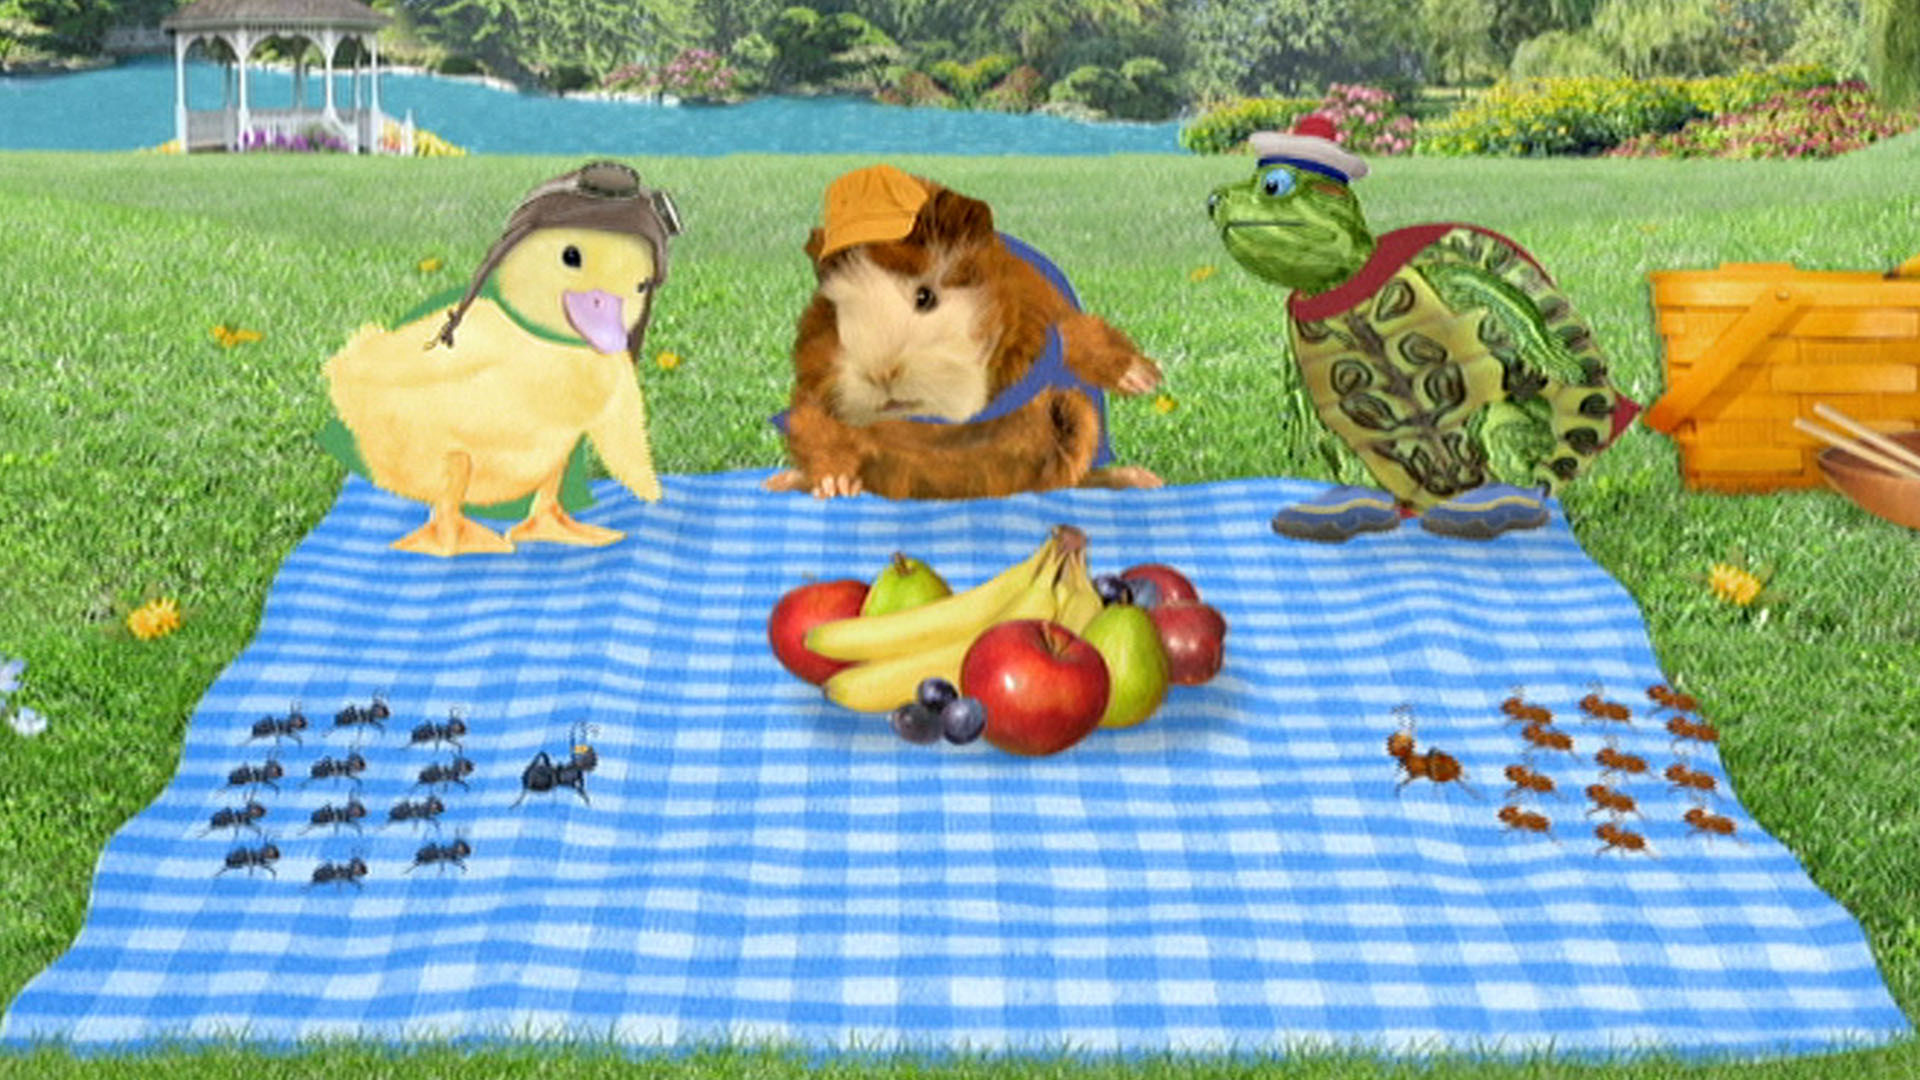 Watch Wonder Pets Season 1 Episode 14 Save The Camelsave The Ants